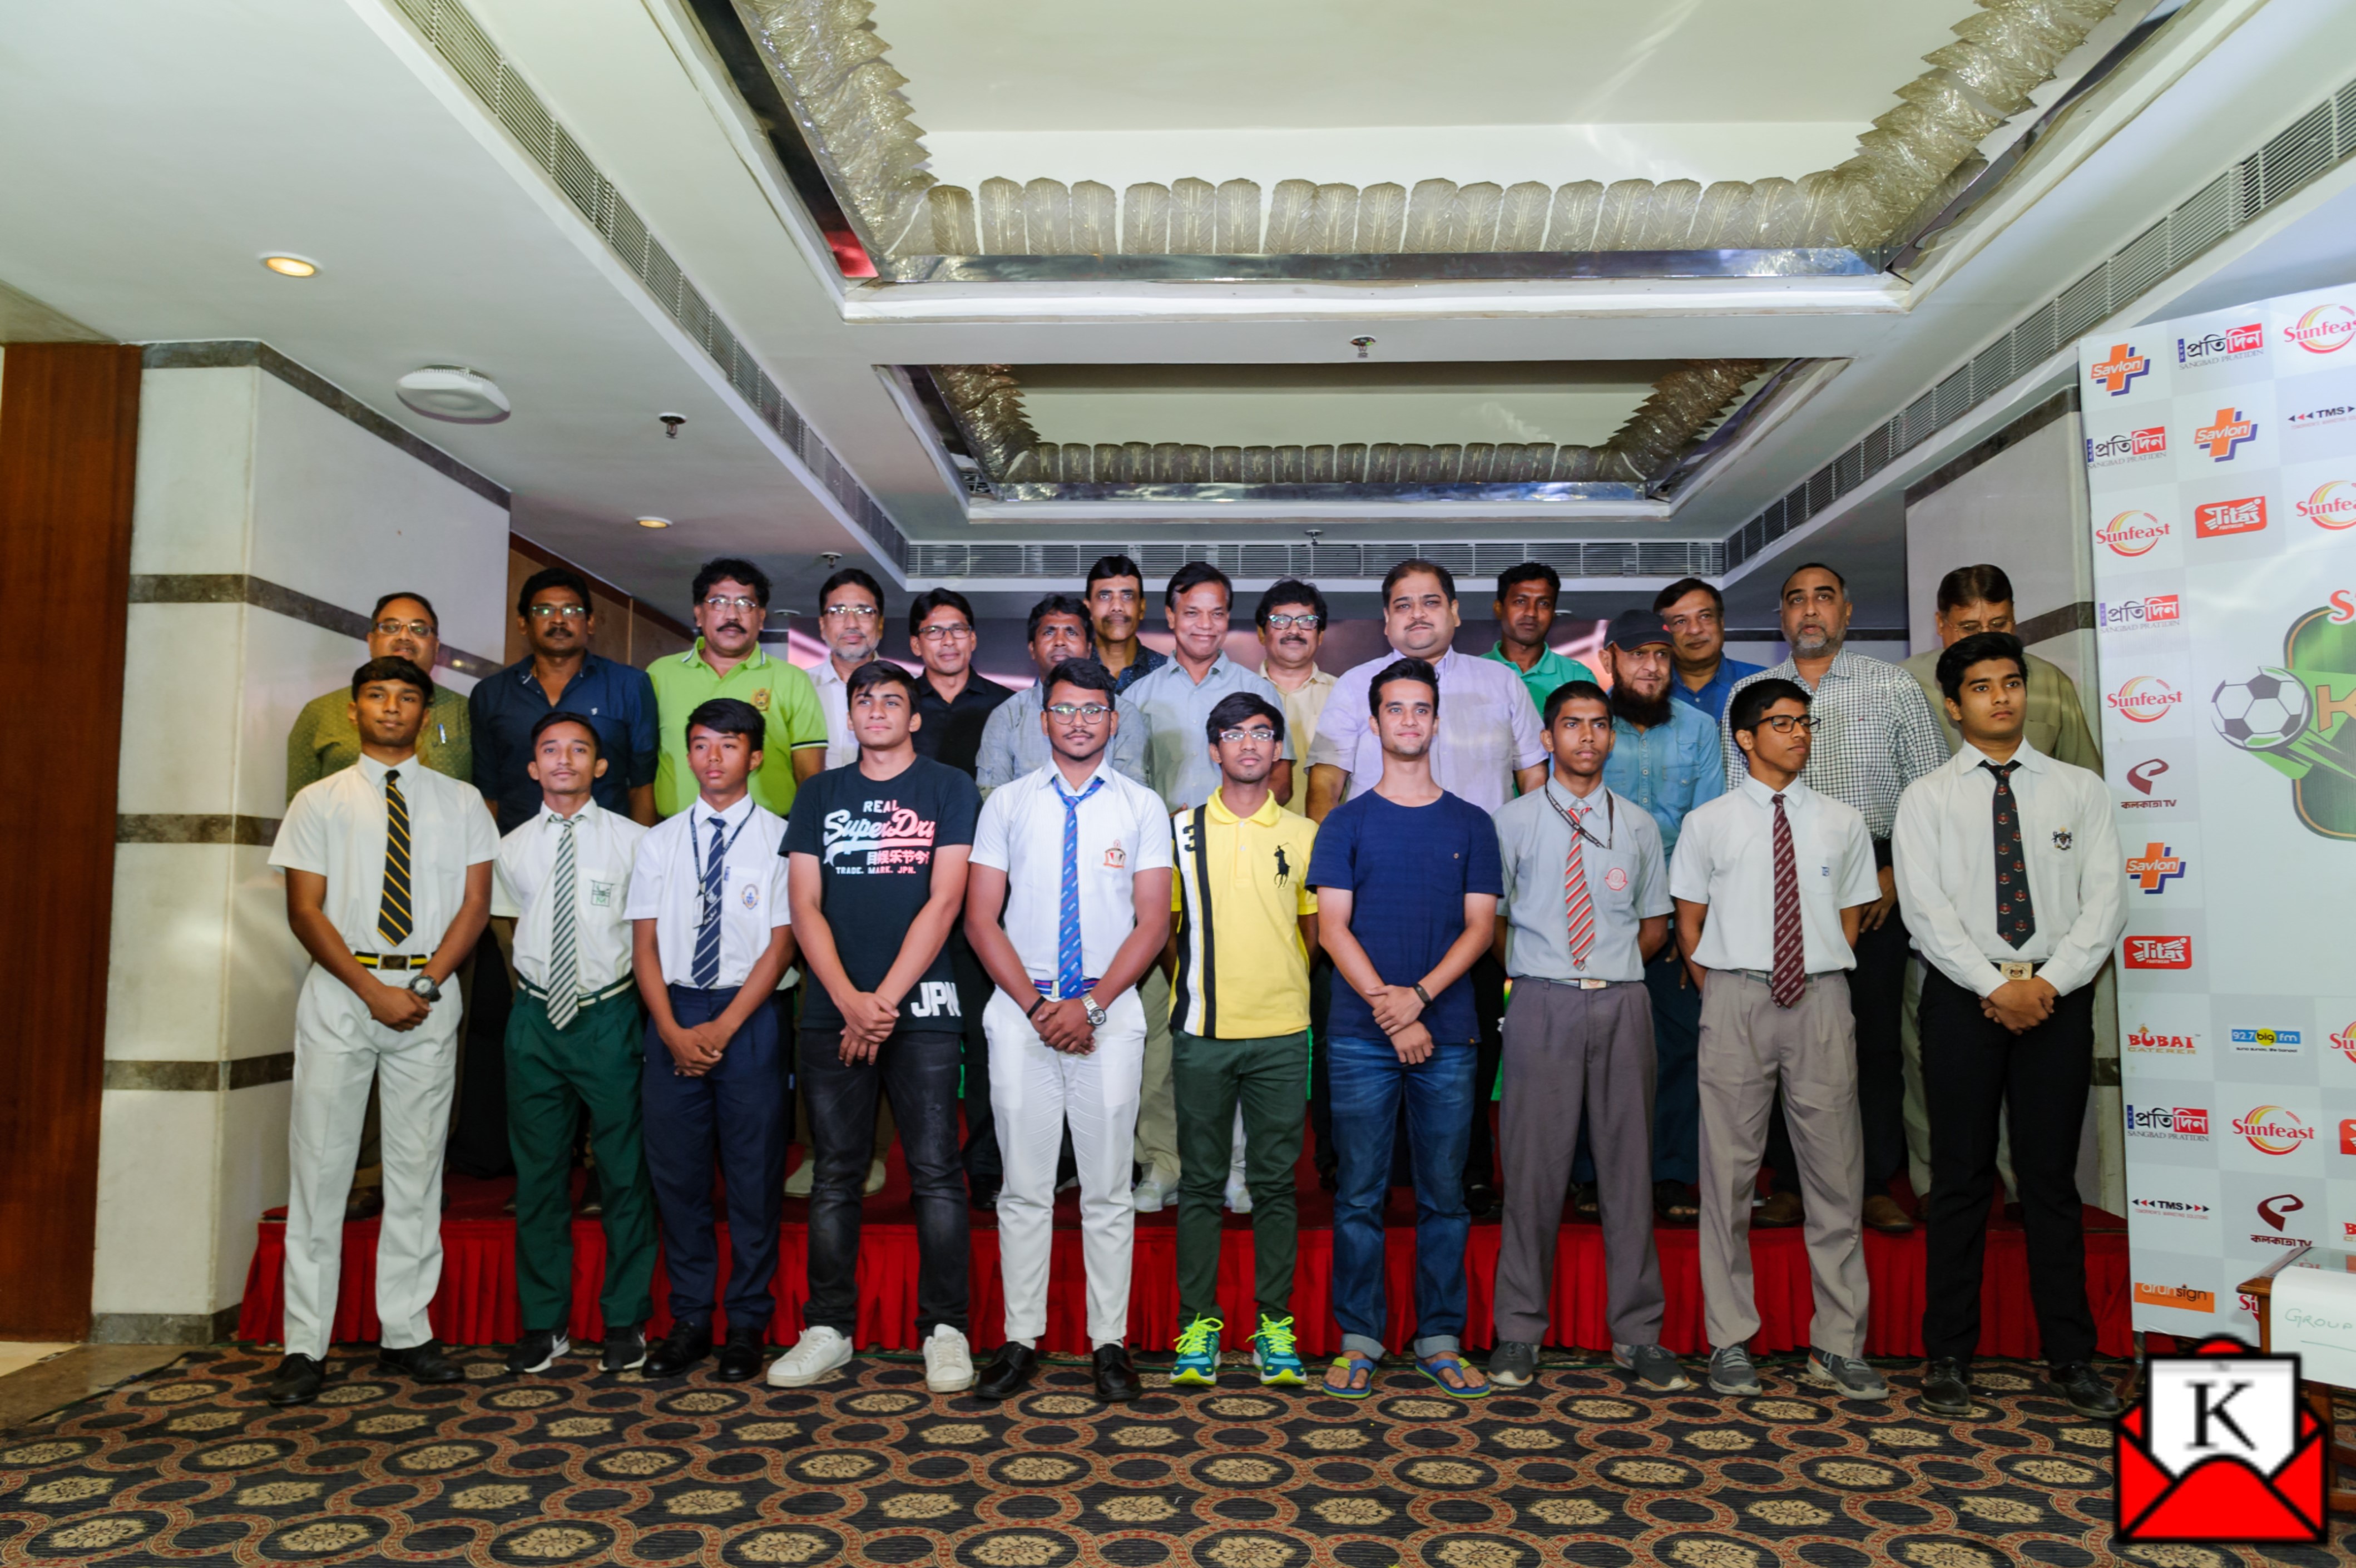 Sunfeast Kolkata Sports Football League Offers Platform to Young Football Enthusiasts in Schools